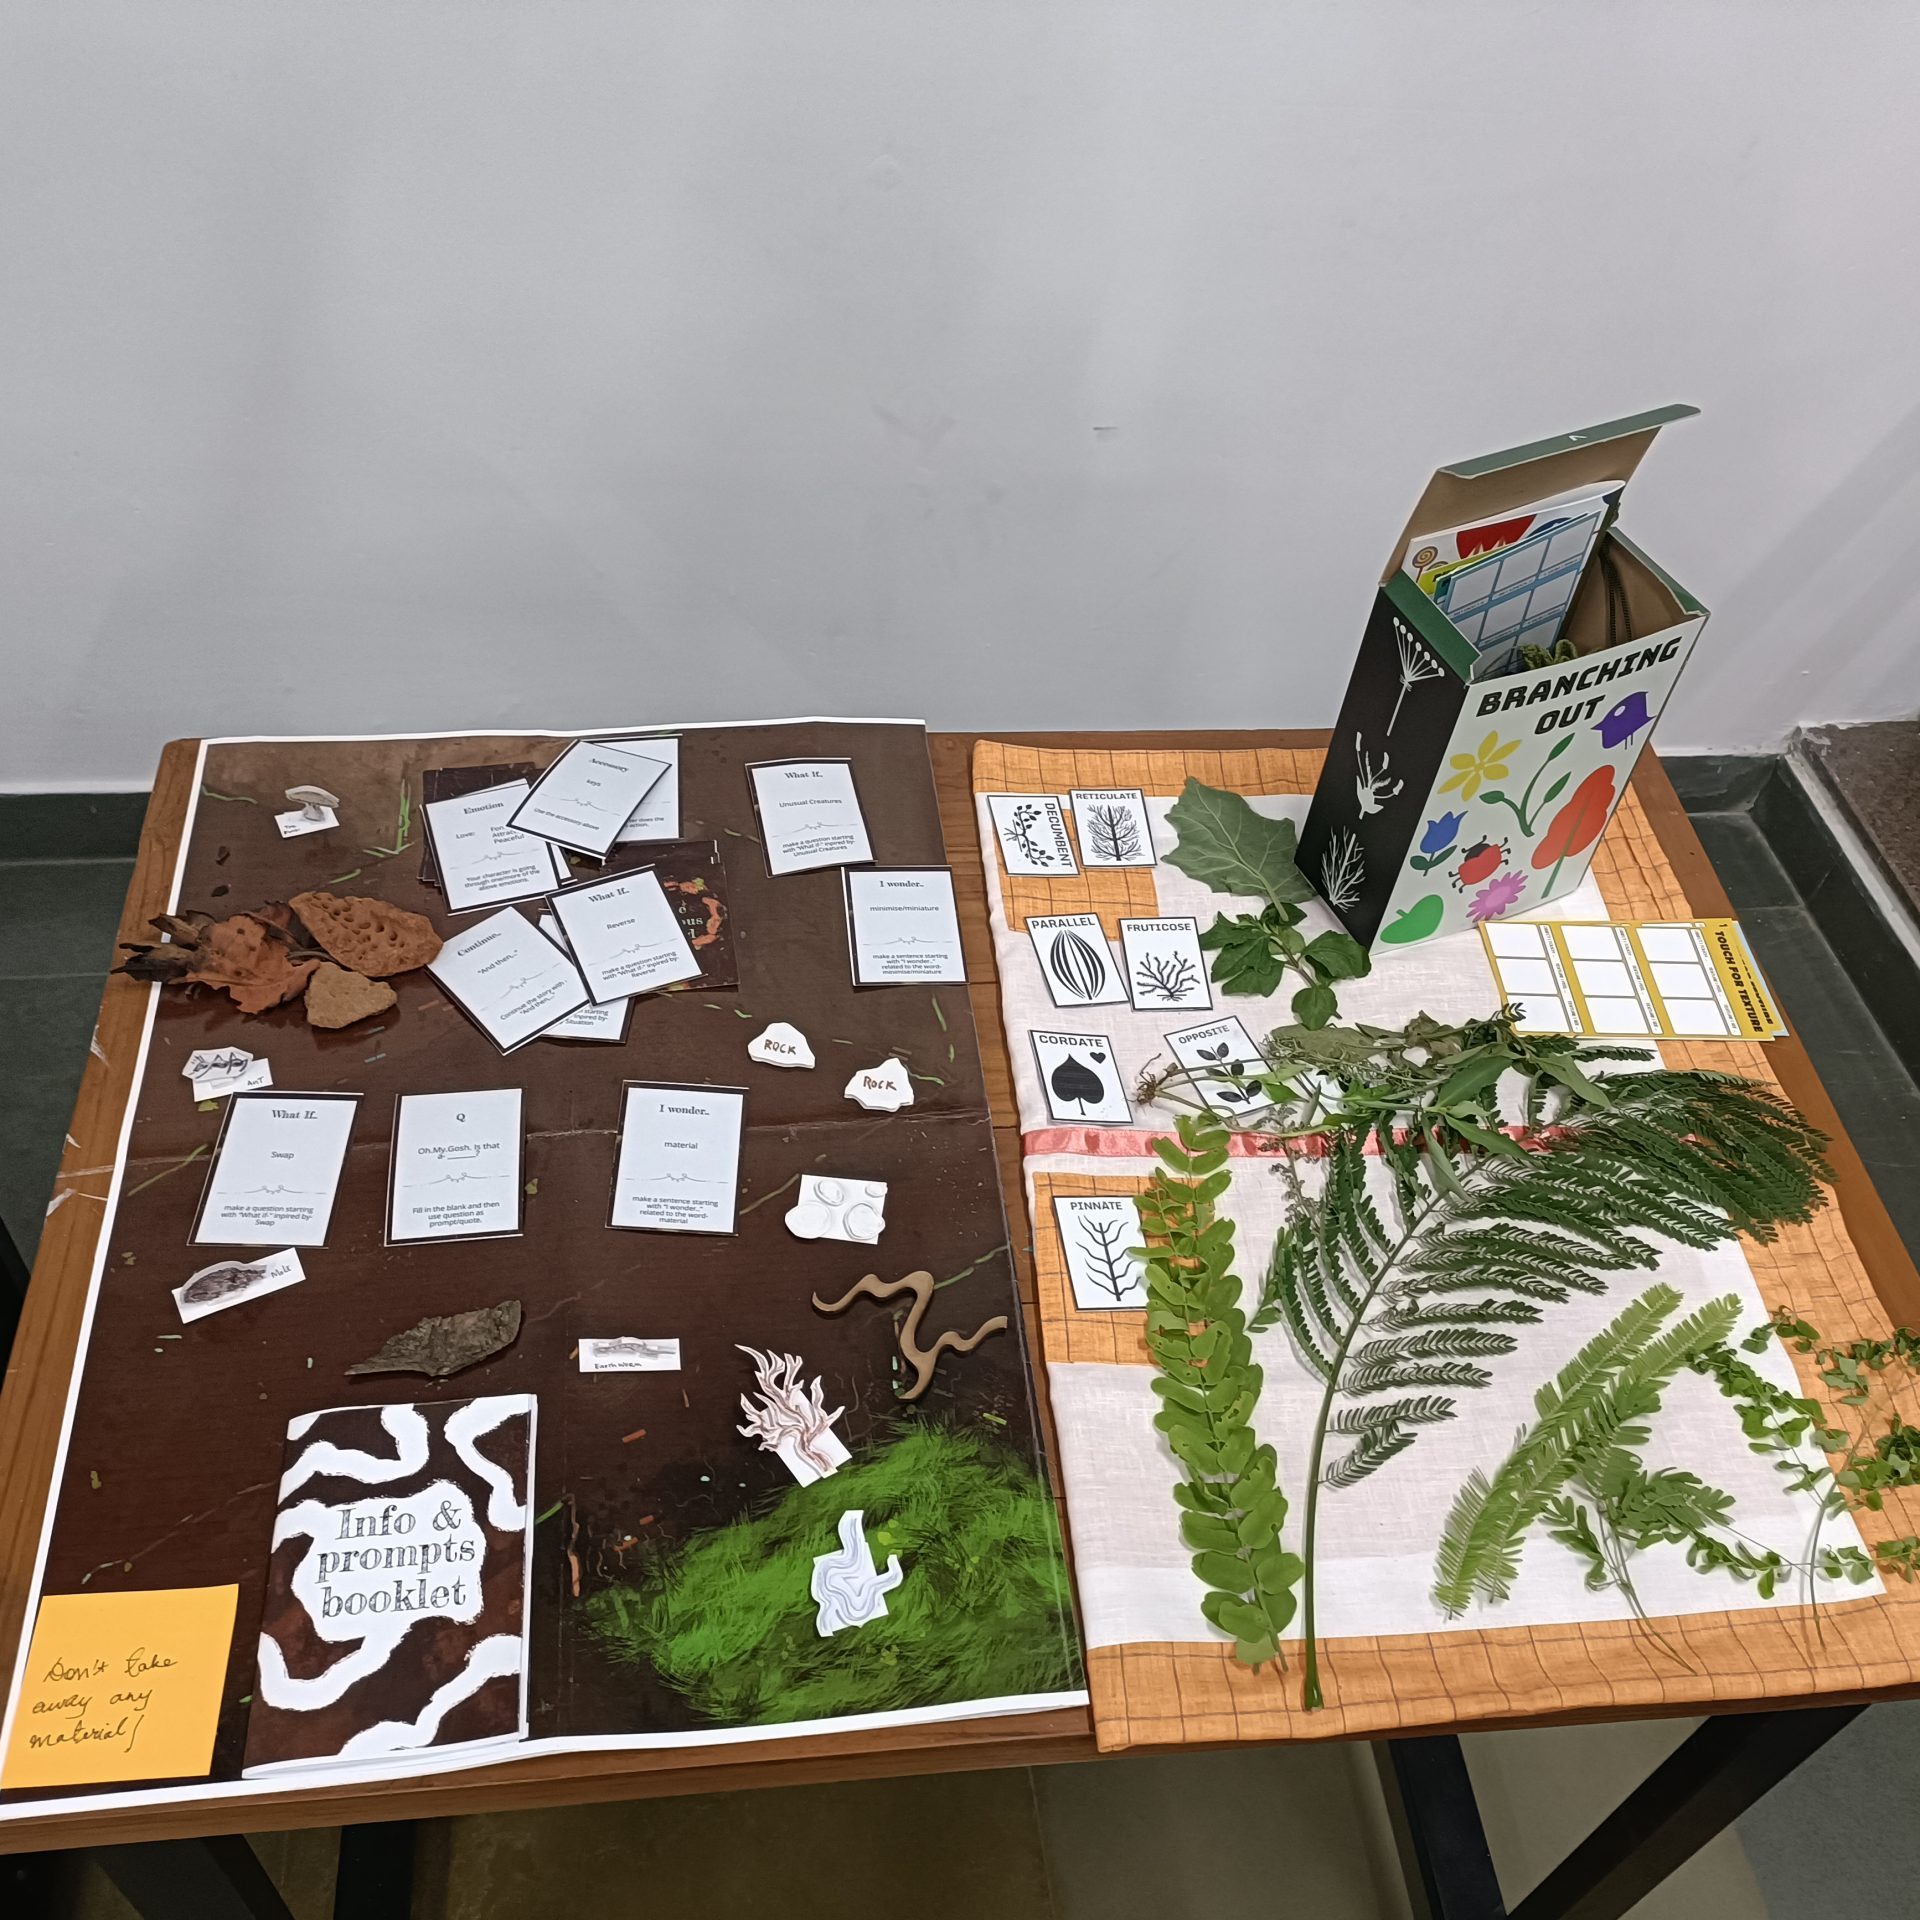 Display of gamified observation and storytelling tools made by students 